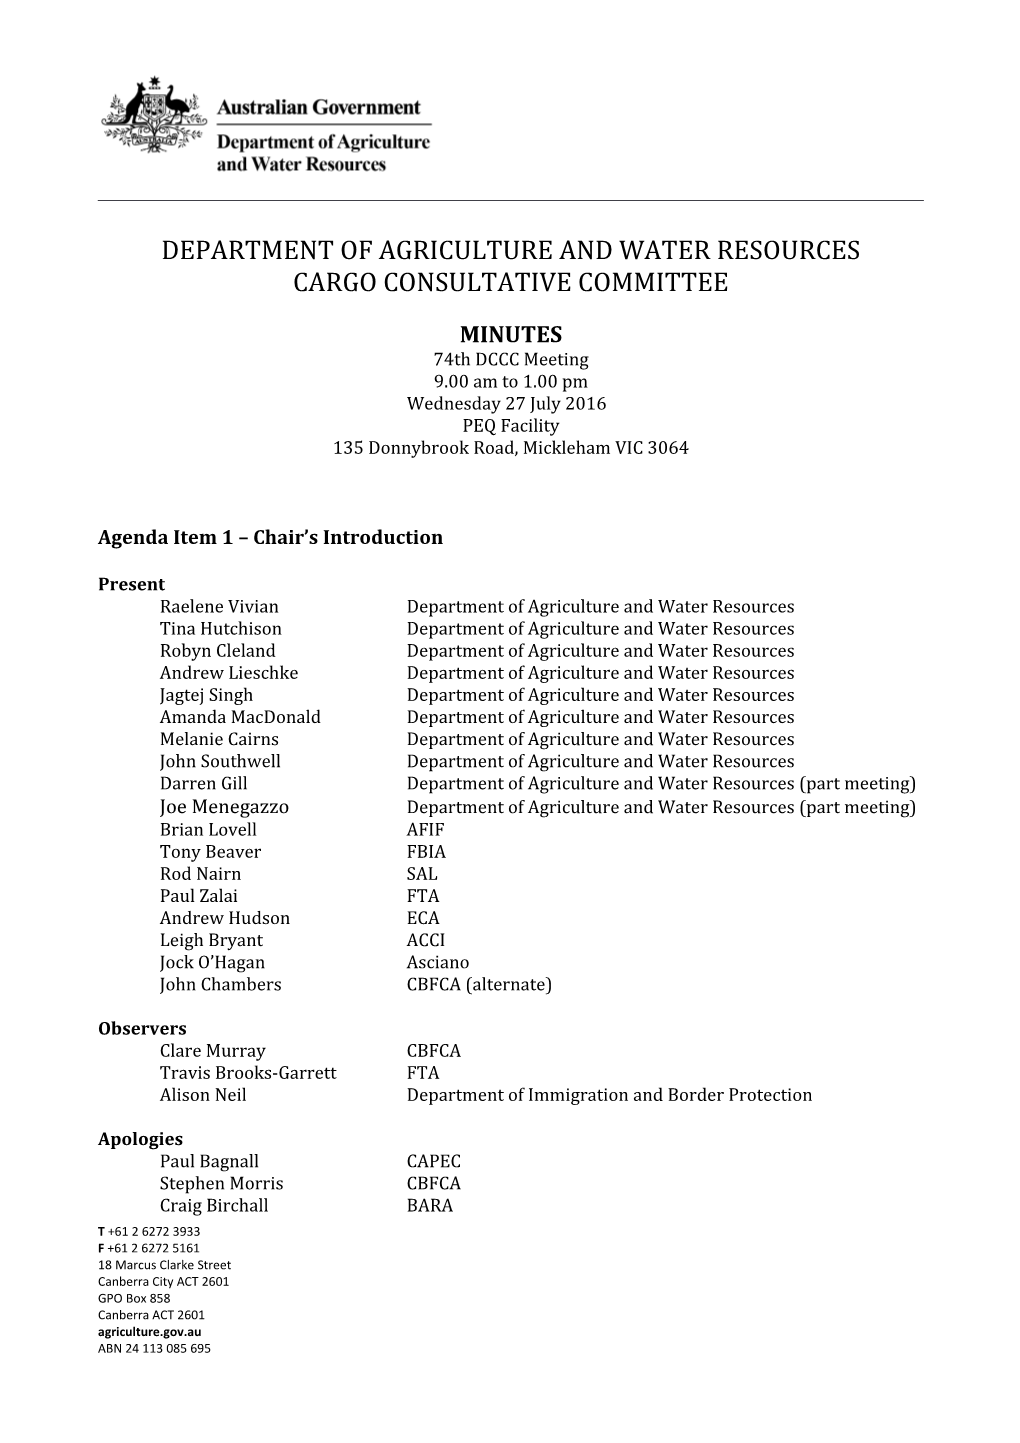 Department of Agriculture and Water Resources Cargo Consultative Committee Minutes 74Th